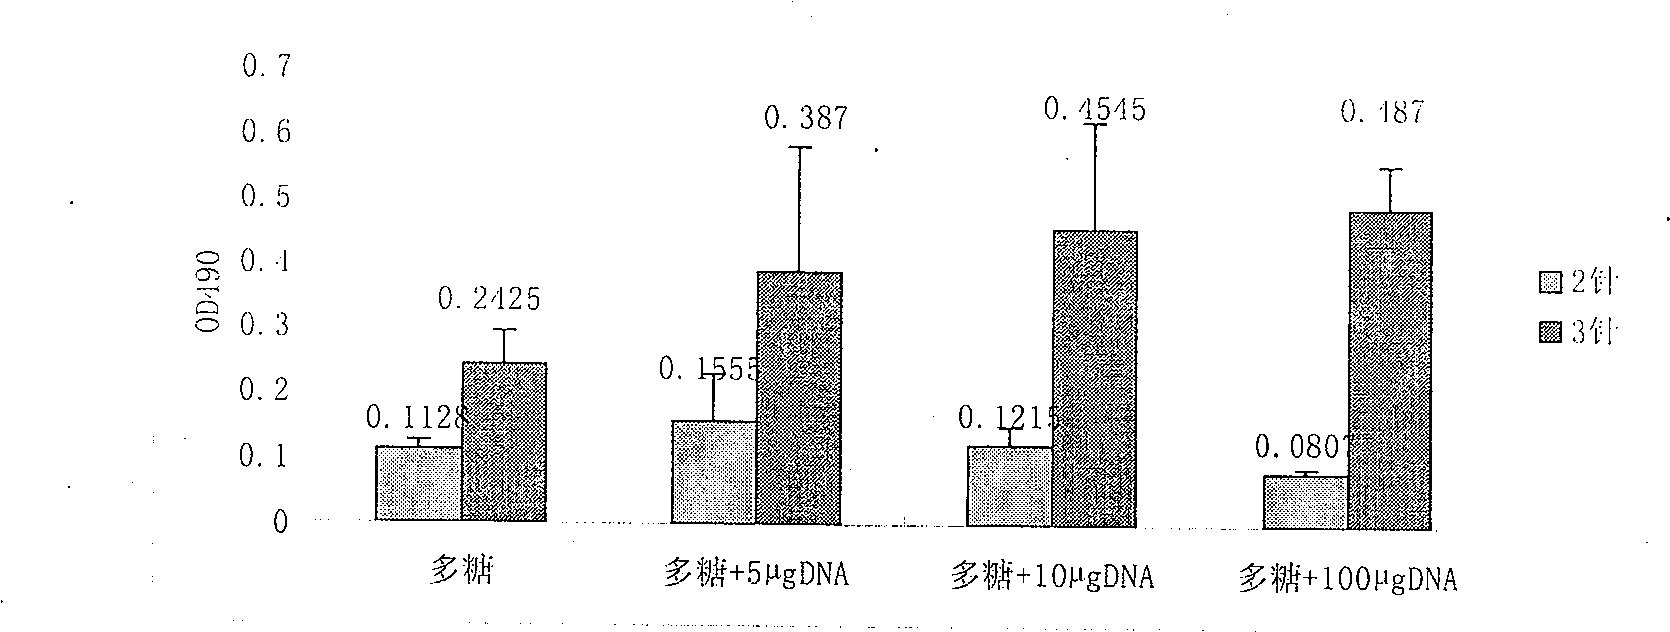 Unmethylated CpG dinucleotide content detection method